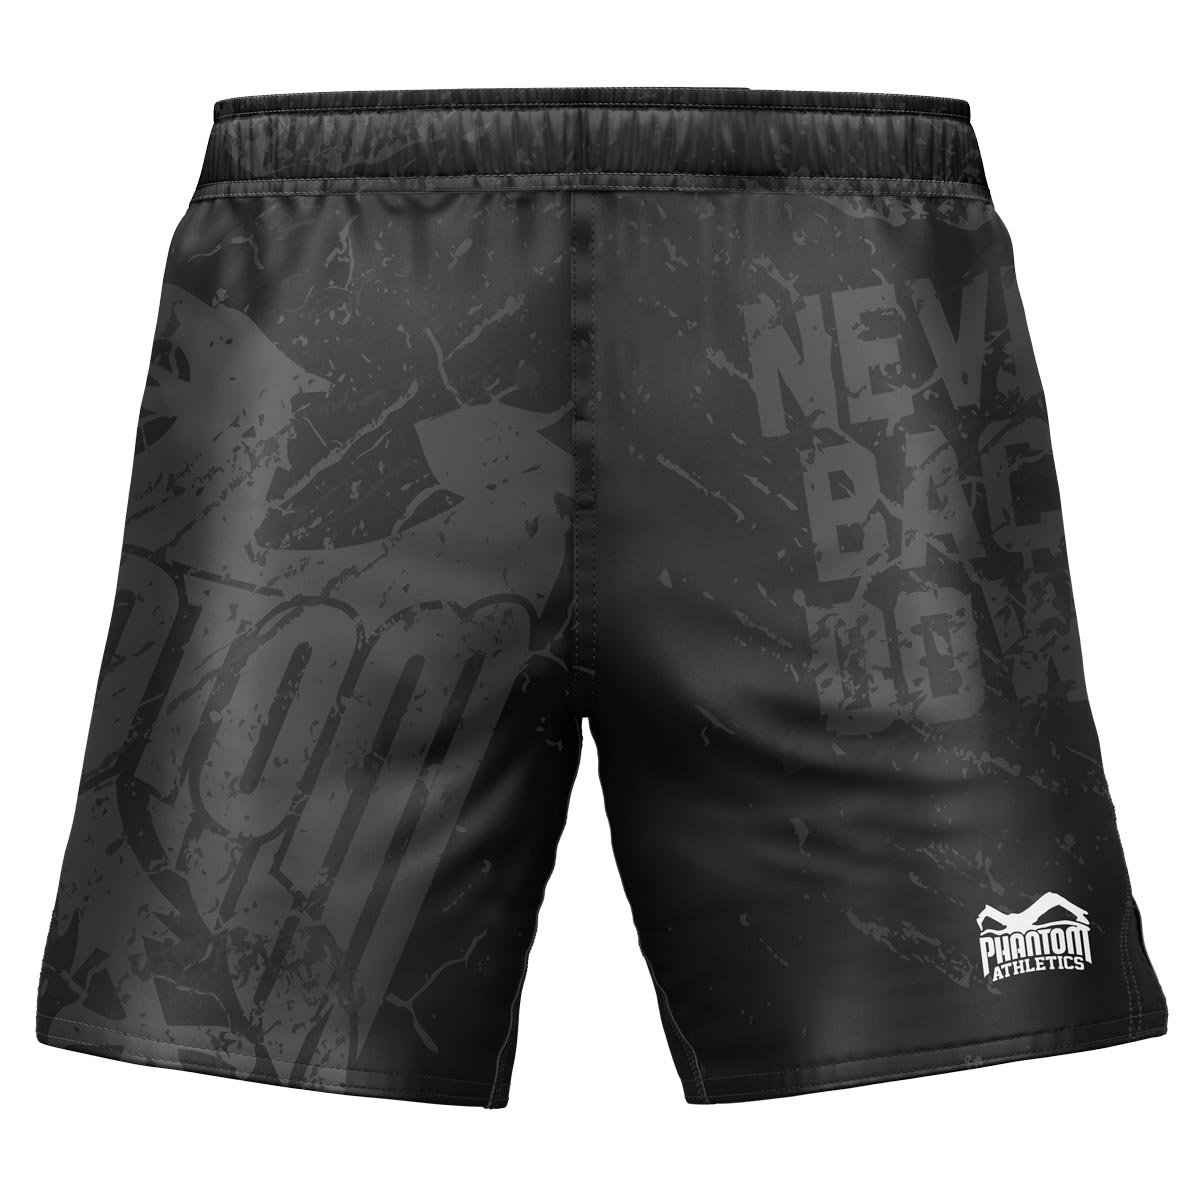 The Phantom EVO fight shorts in Team Germany design. With Germany eagle and "Never Back Down" lettering. Ideal for your combat sports, such as MMA, Muay Thai, wrestling, BJJ or kickboxing.